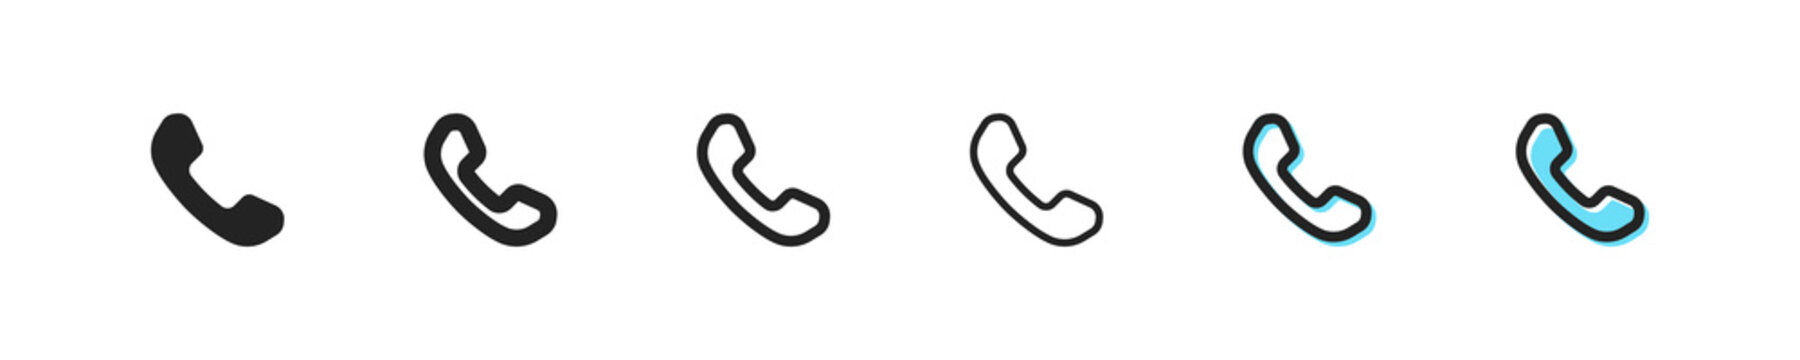 Call icon. Vector phone symbol. Simple mobile outline signs. Communication button, web sign. Telephone icon. Telephone, receiver support service, call phone flat icons.